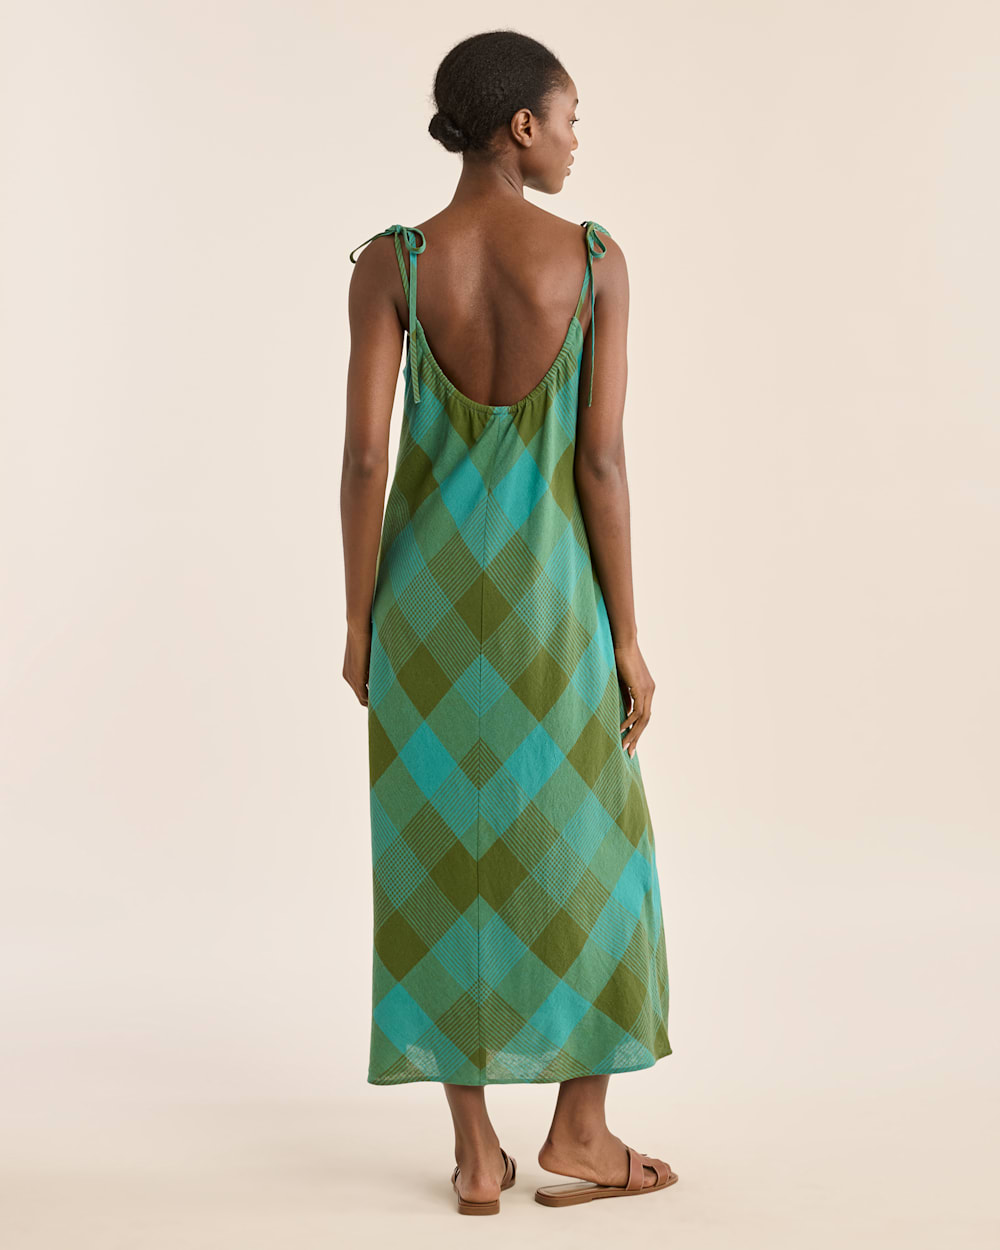 ALTERNATE VIEW OF WOMEN'S ASTORIA SLIP DRESS IN TEAL/GREEN CHECK image number 3